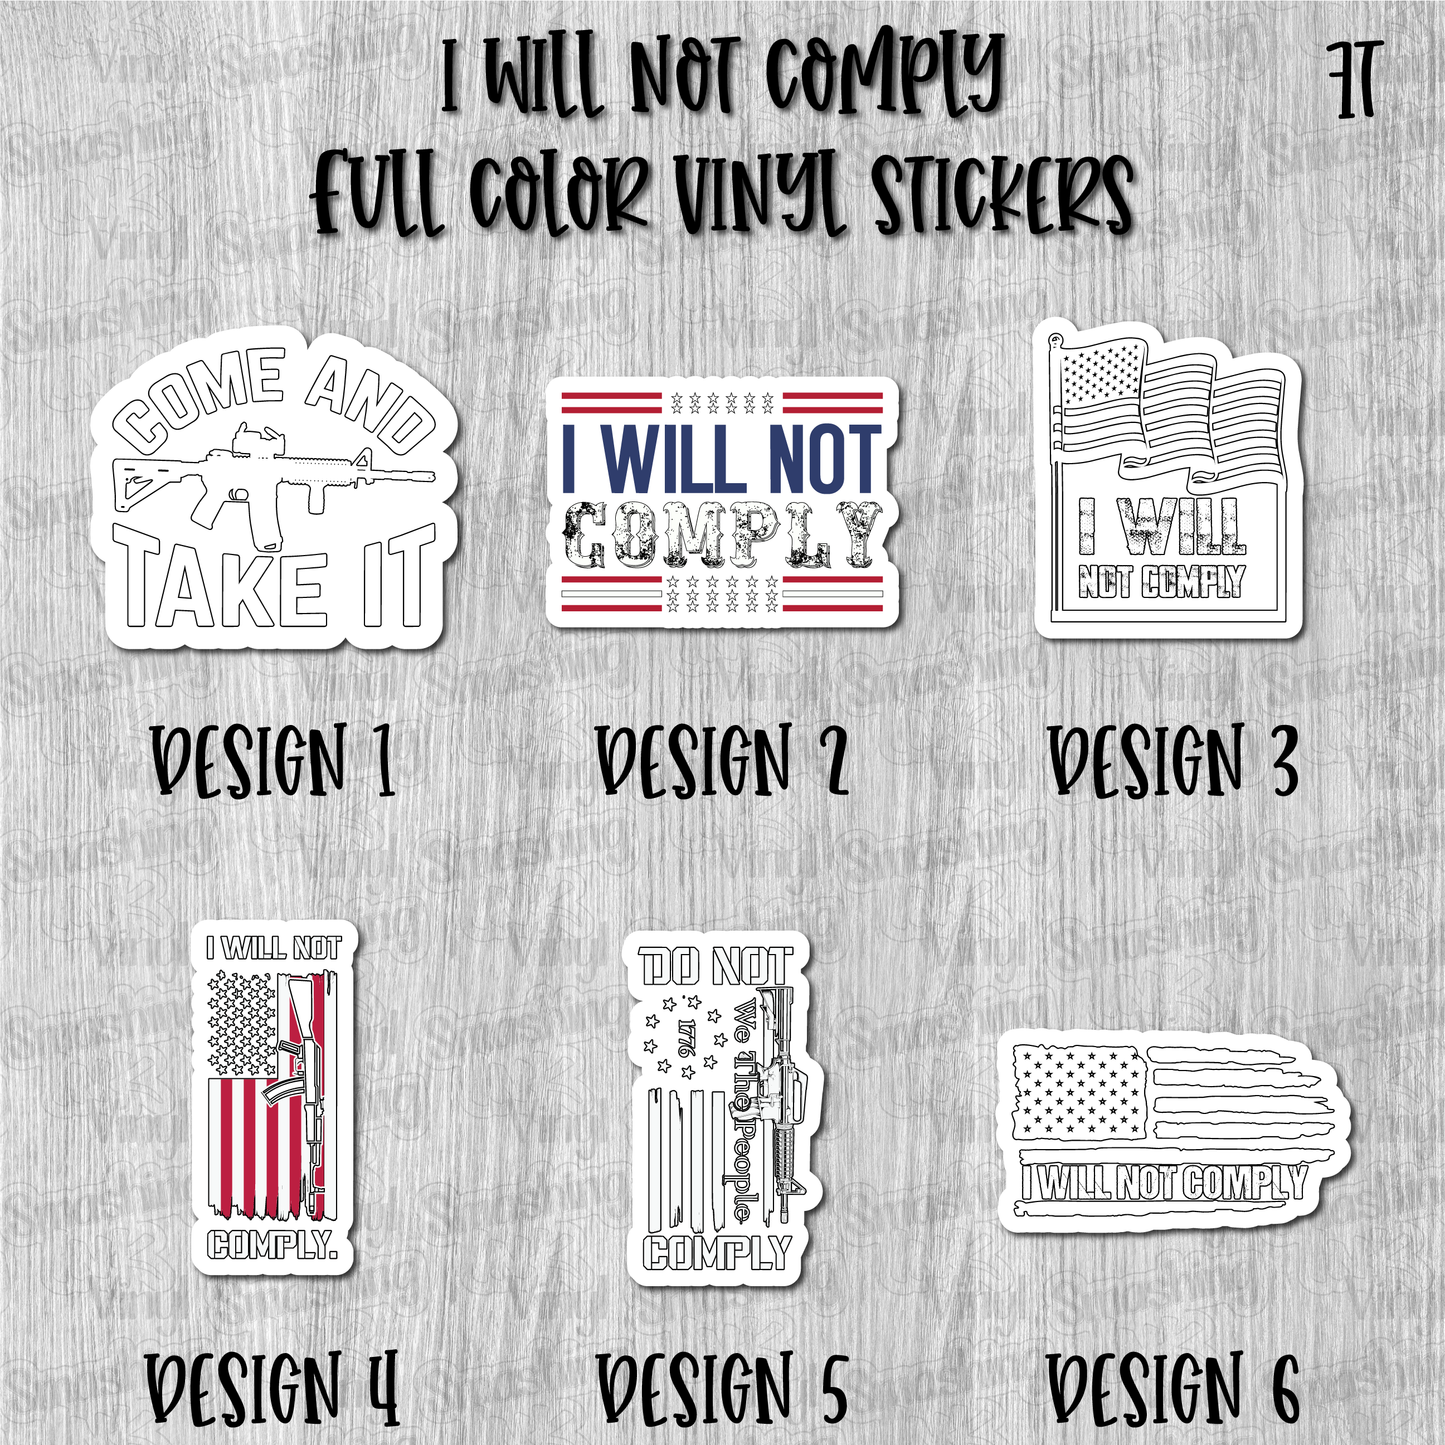 I Will Not Comply - Full Color Vinyl Stickers (SHIPS IN 3-7 BUS DAYS)